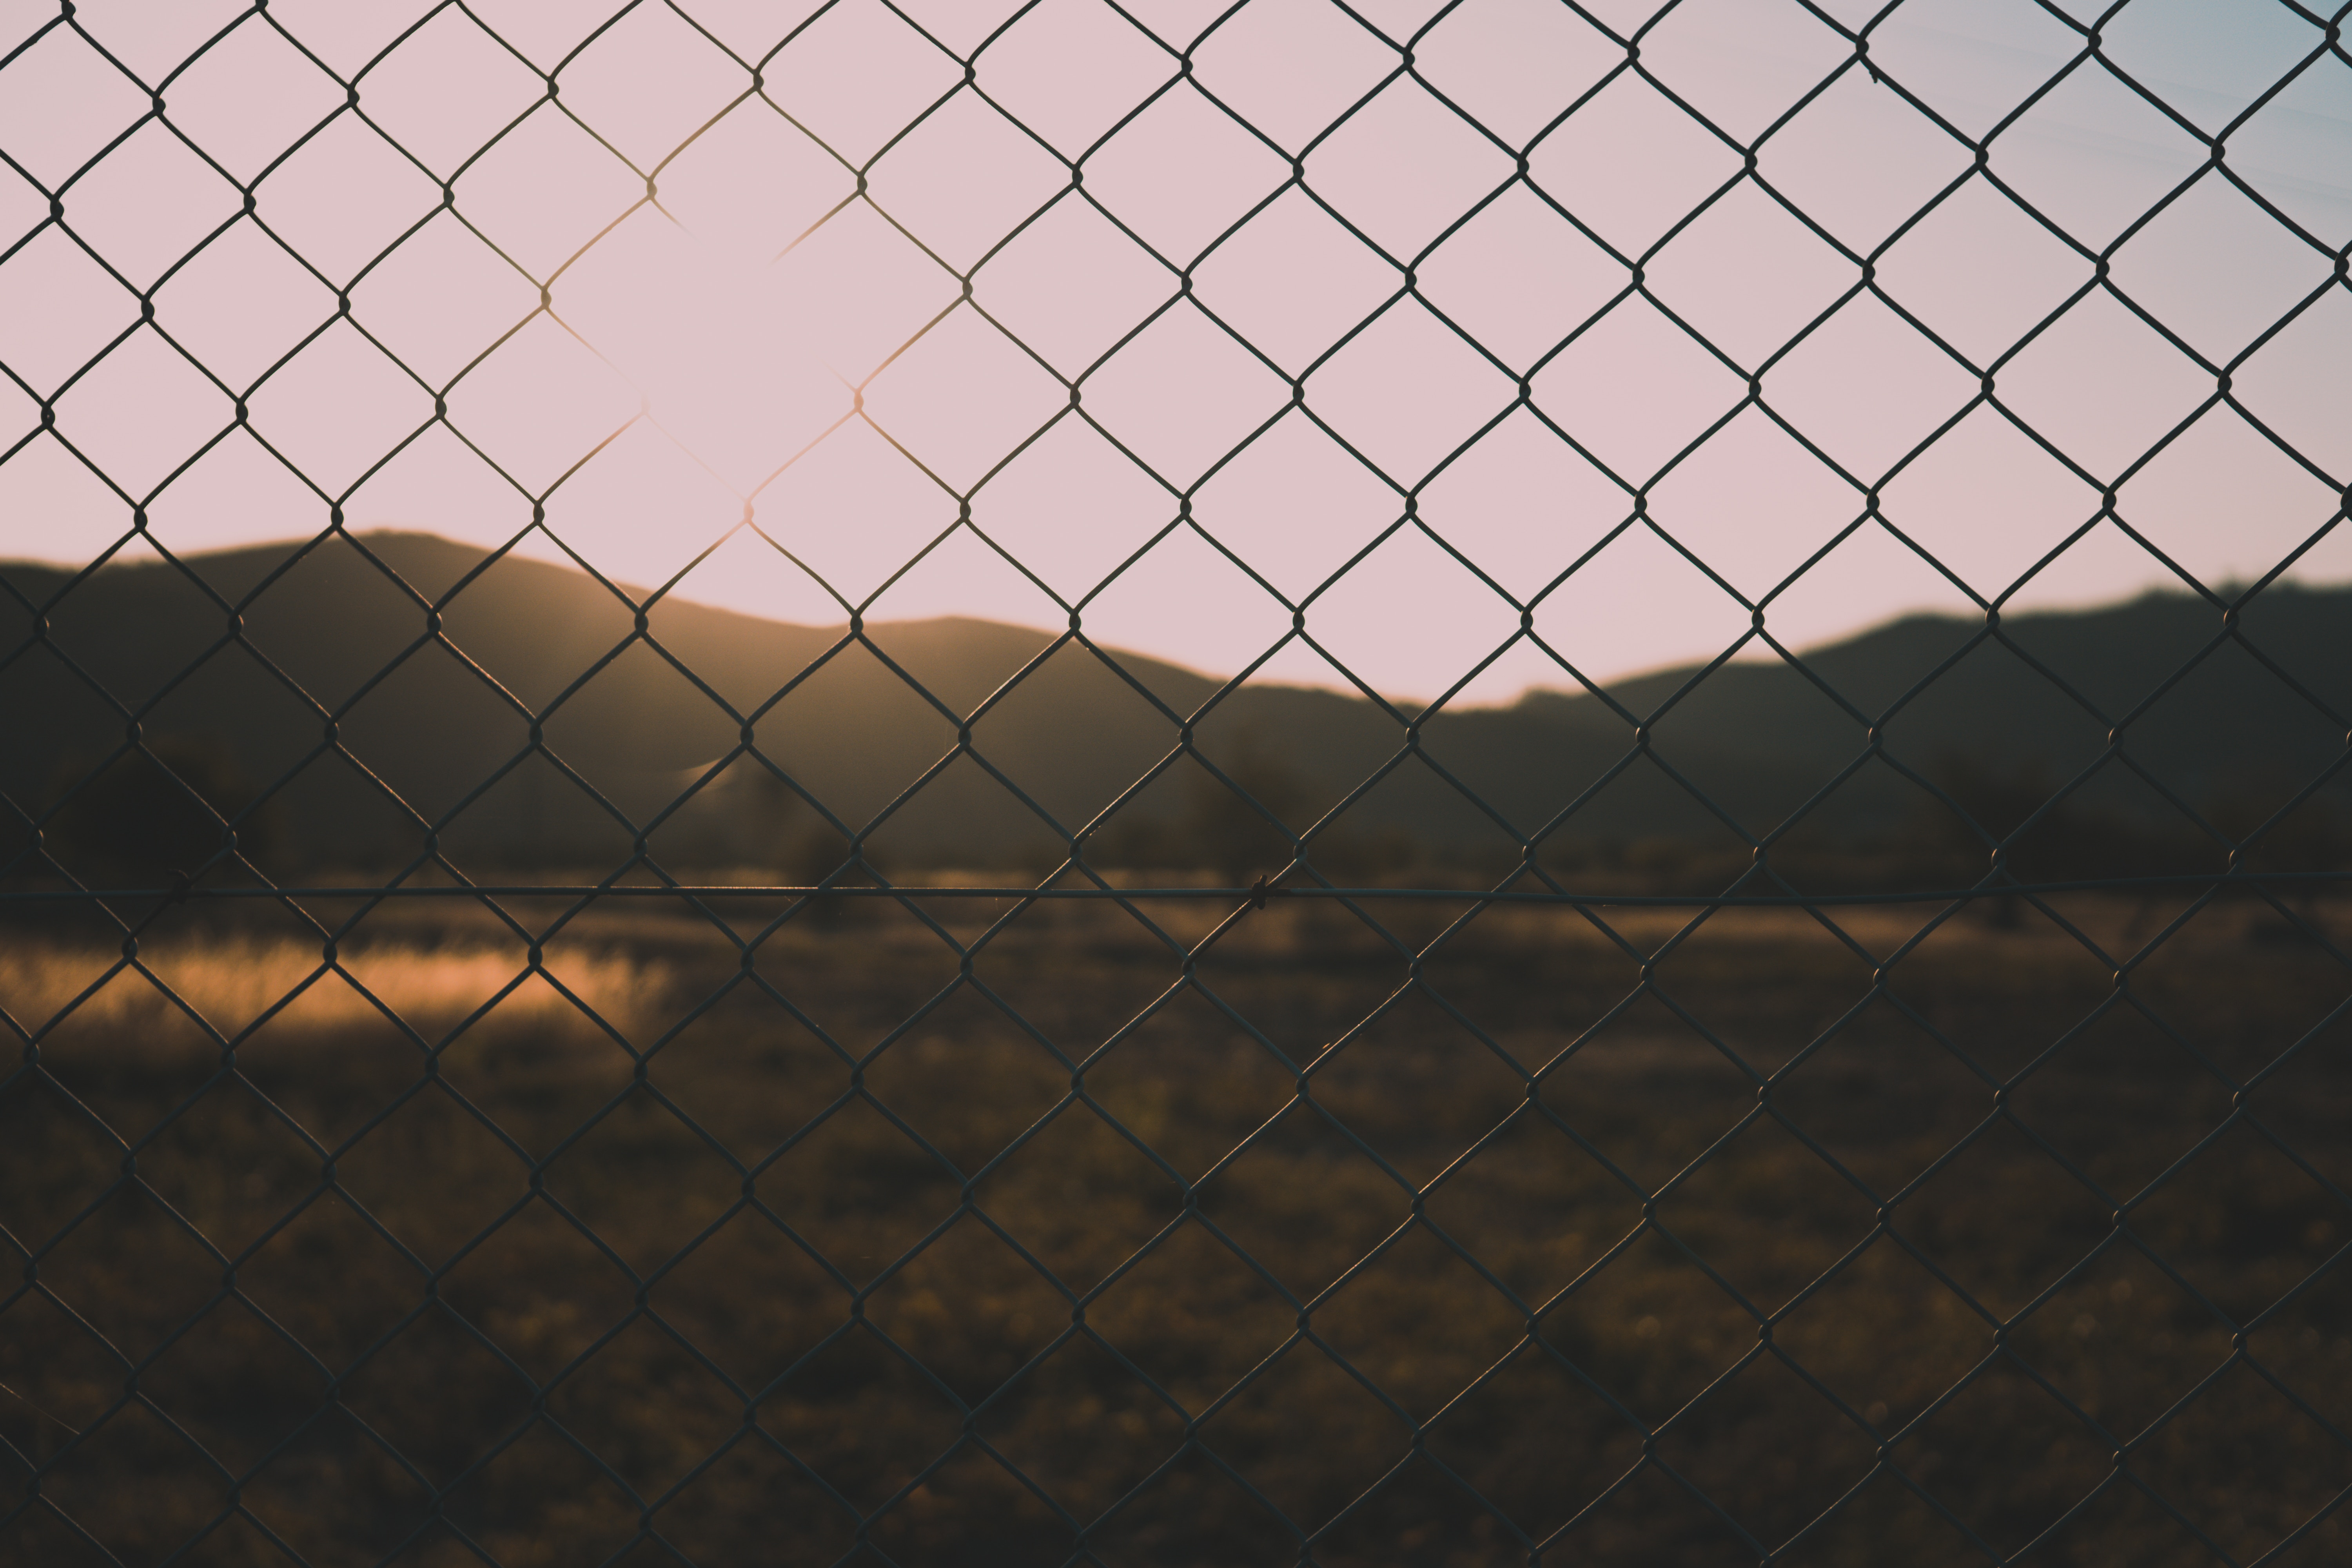 blur, smooth, nature, grid, fence